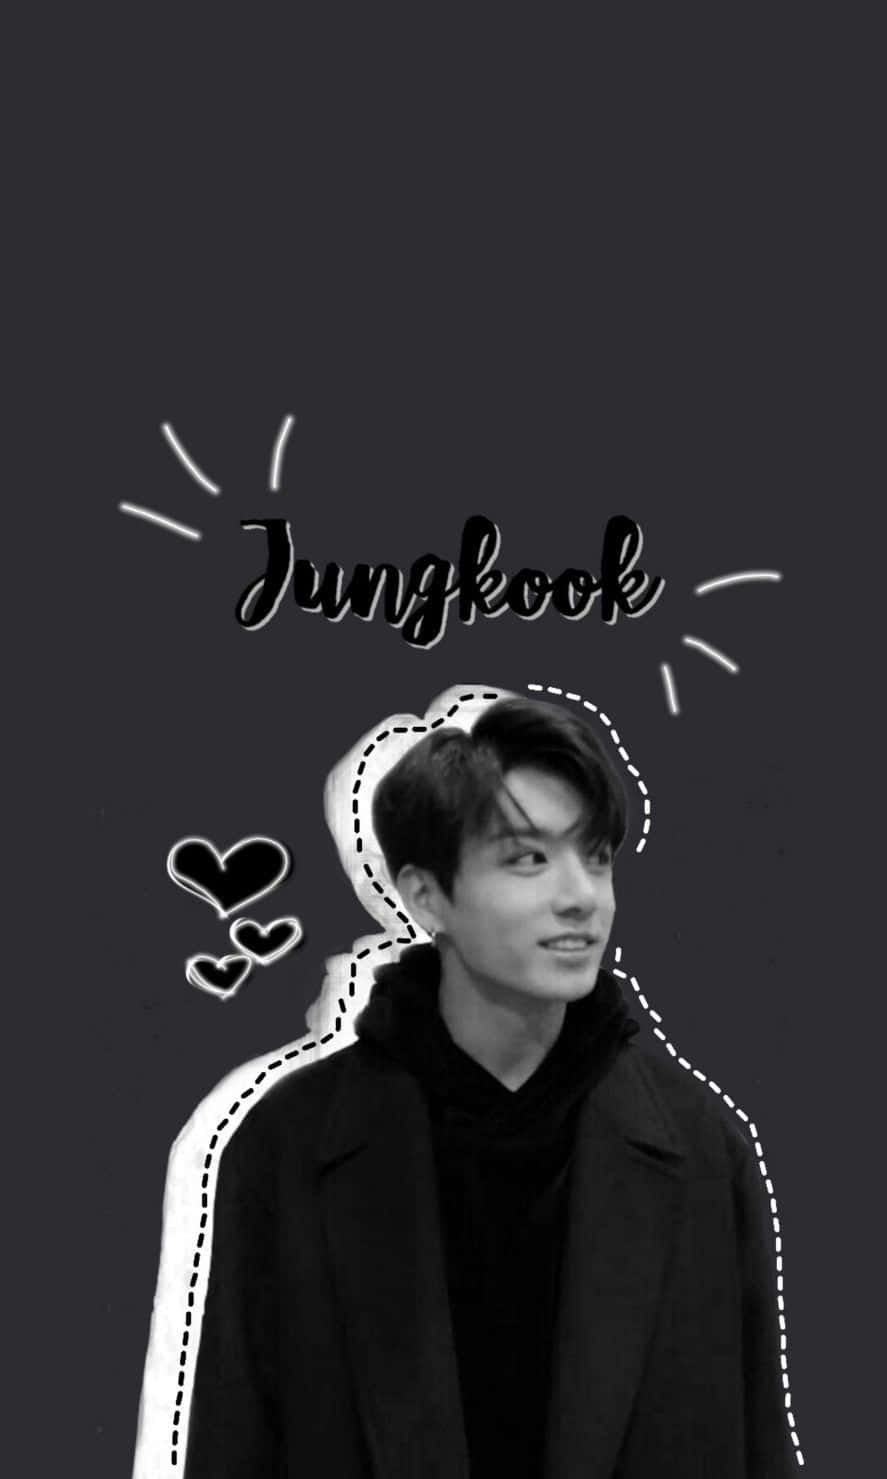 Jungkook from BTS wallpaper I made for my phone! - Jungkook